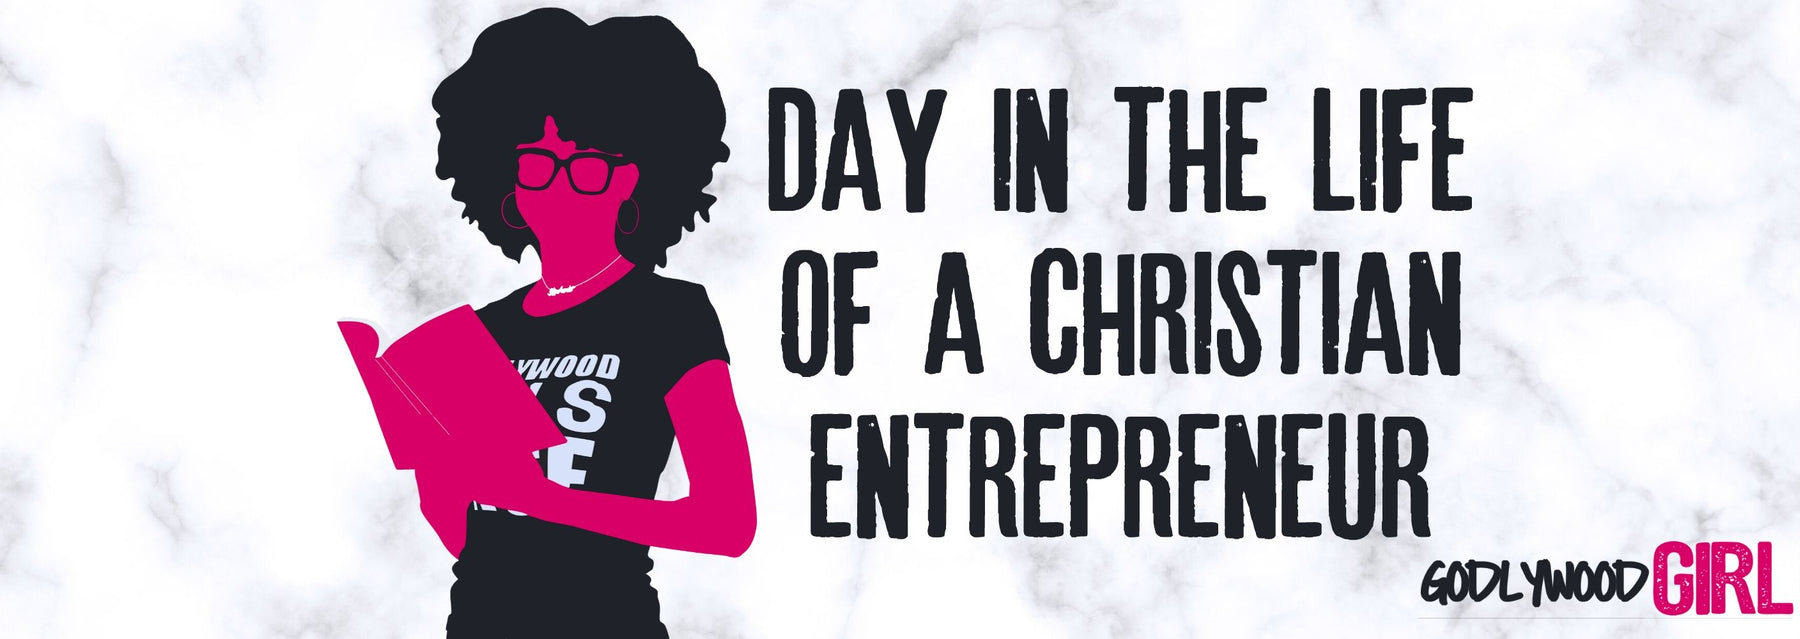 Day In The Life Of A Christian Entrepreneur Ep.26 | Day In the Life Of An Internet Entrepreneur